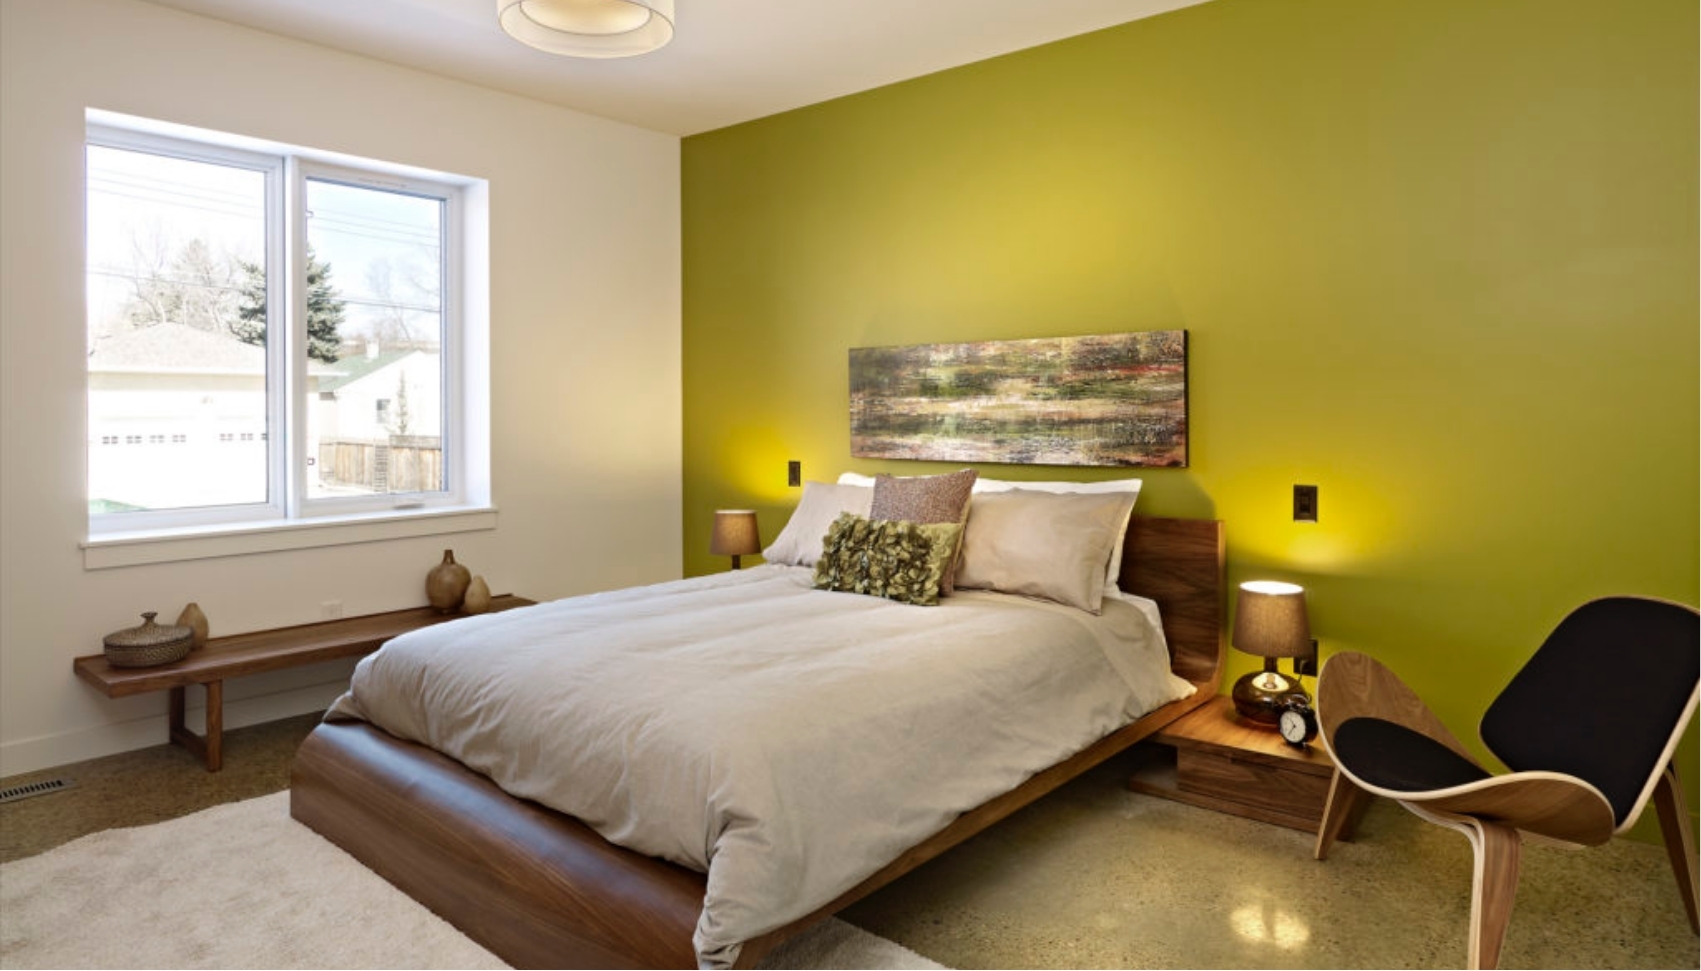 Modern bedroom with green accent room displays wide access areas and custom lighting for adaptive living